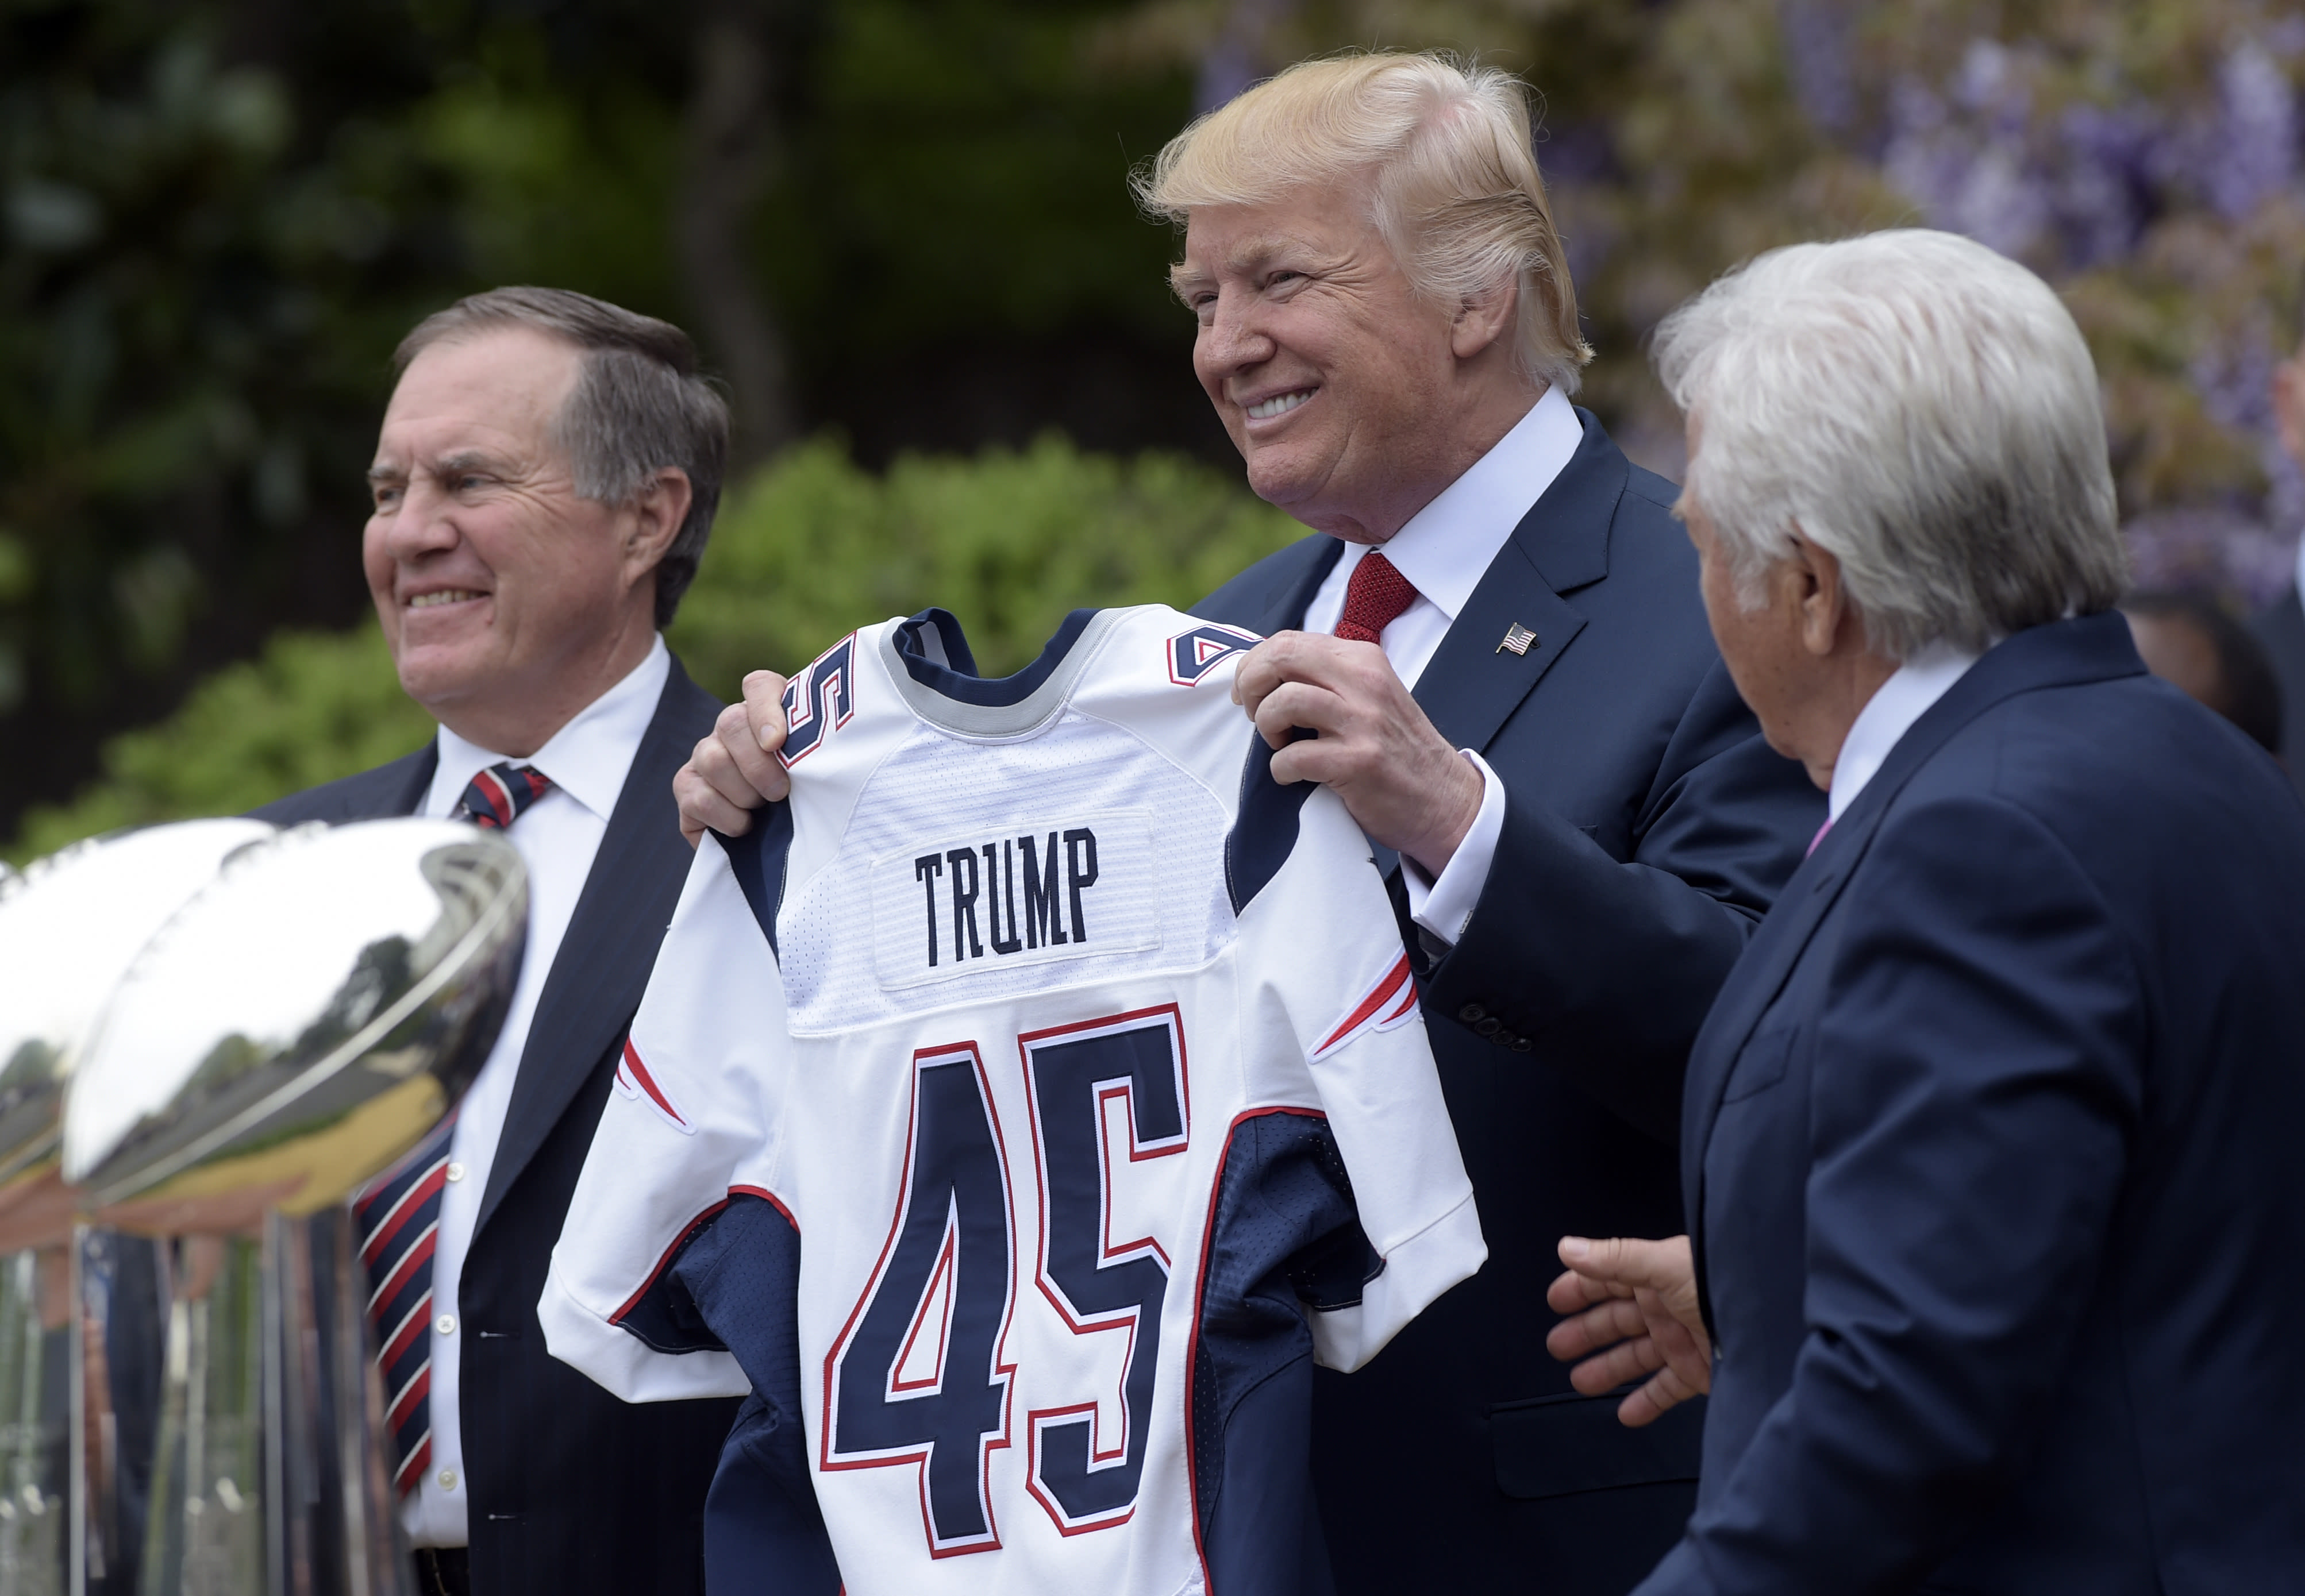 Trump sells 'Stand Up for America' jerseys